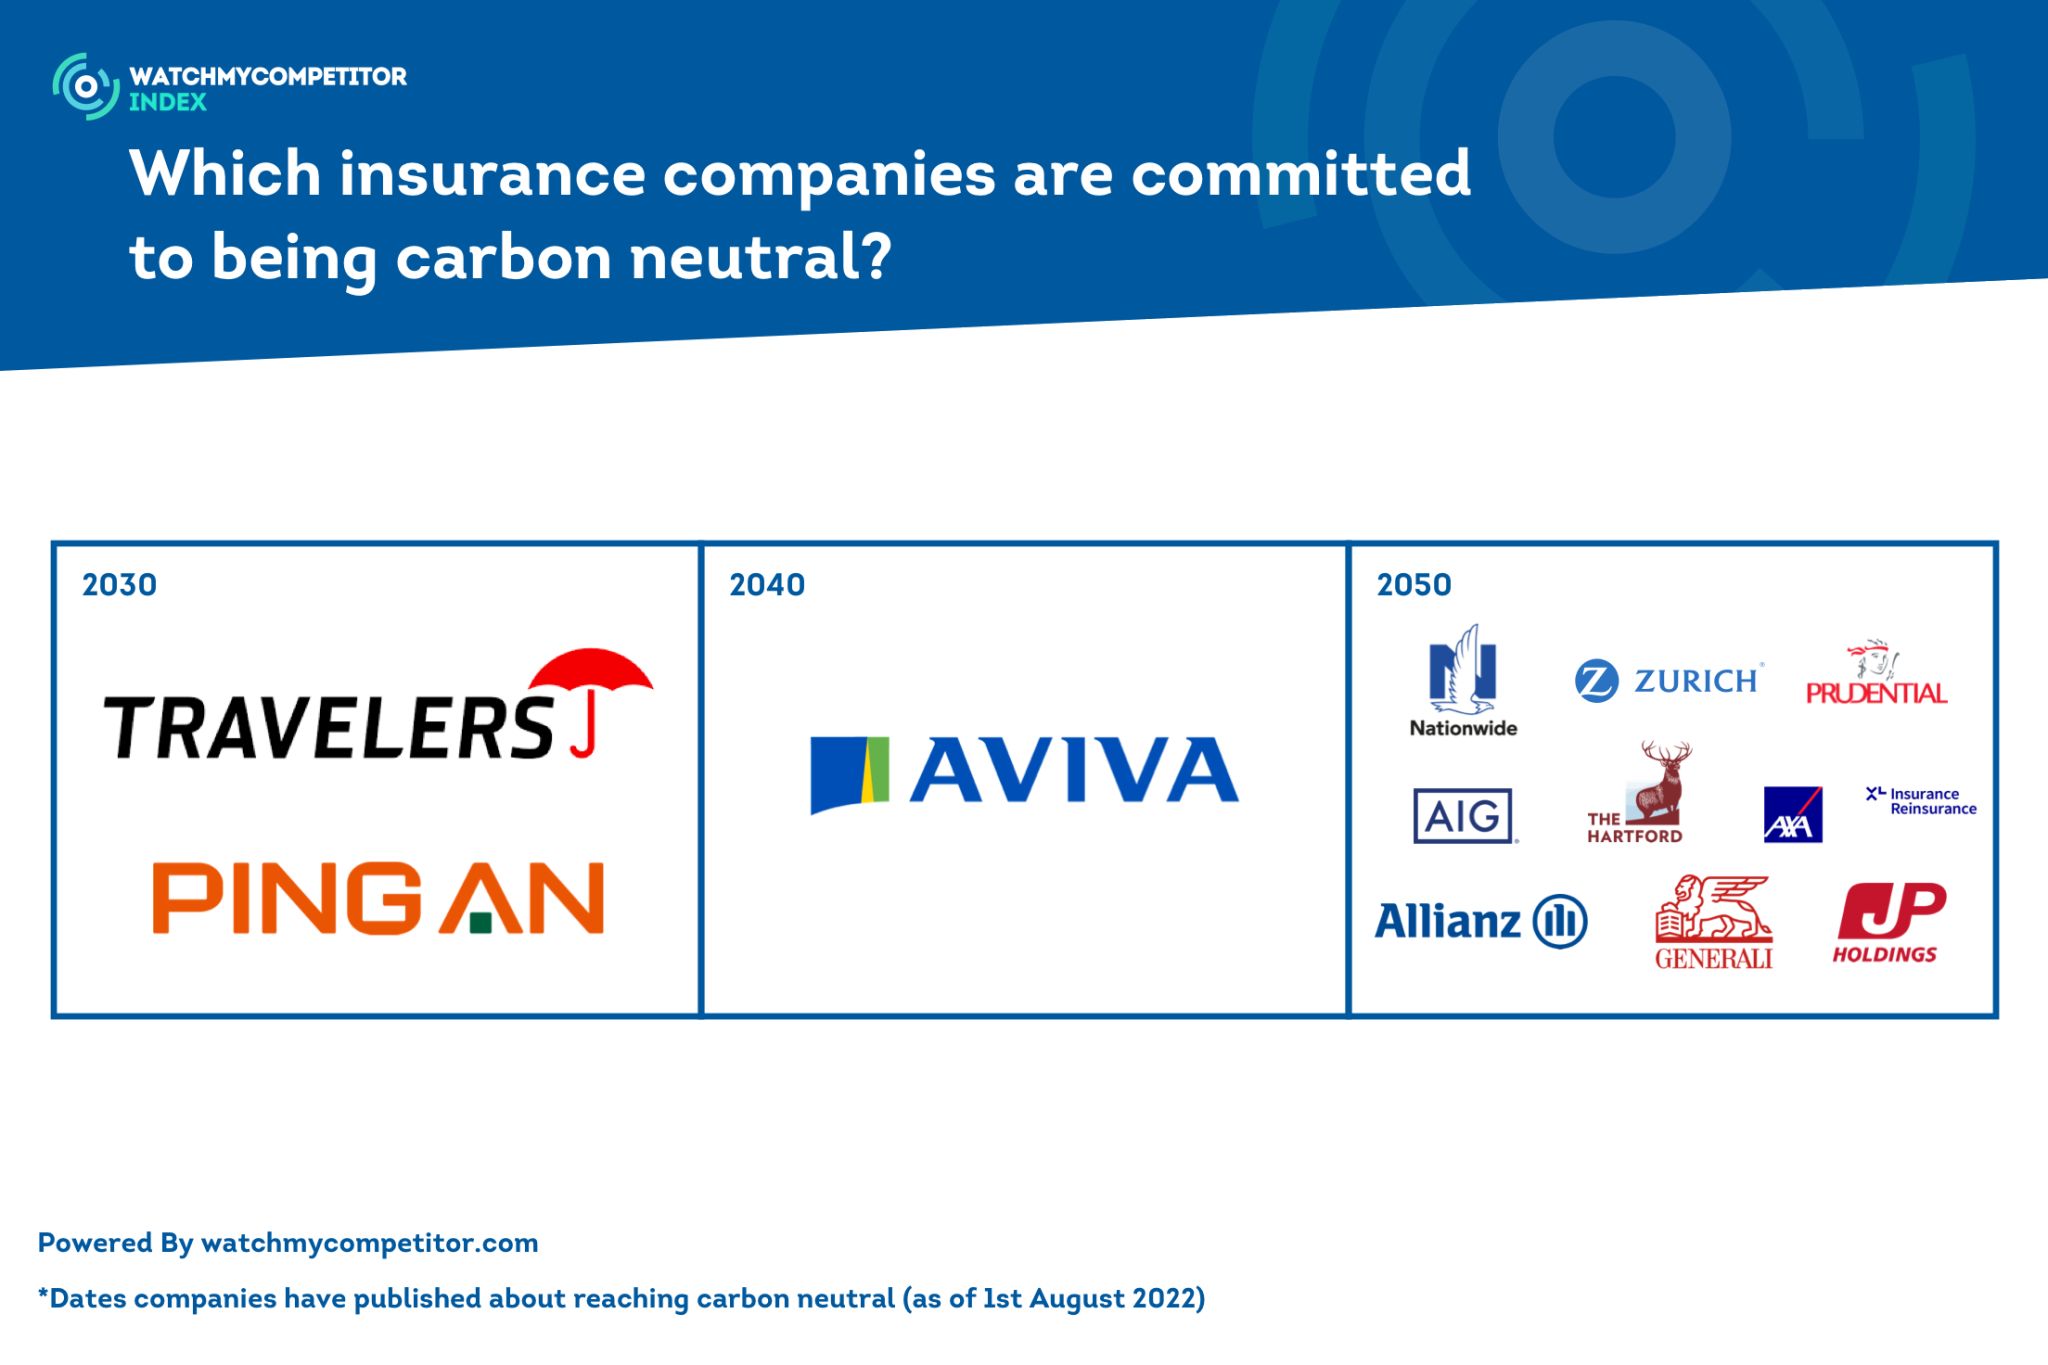 Which insurance companies are committed to being carbon neutral